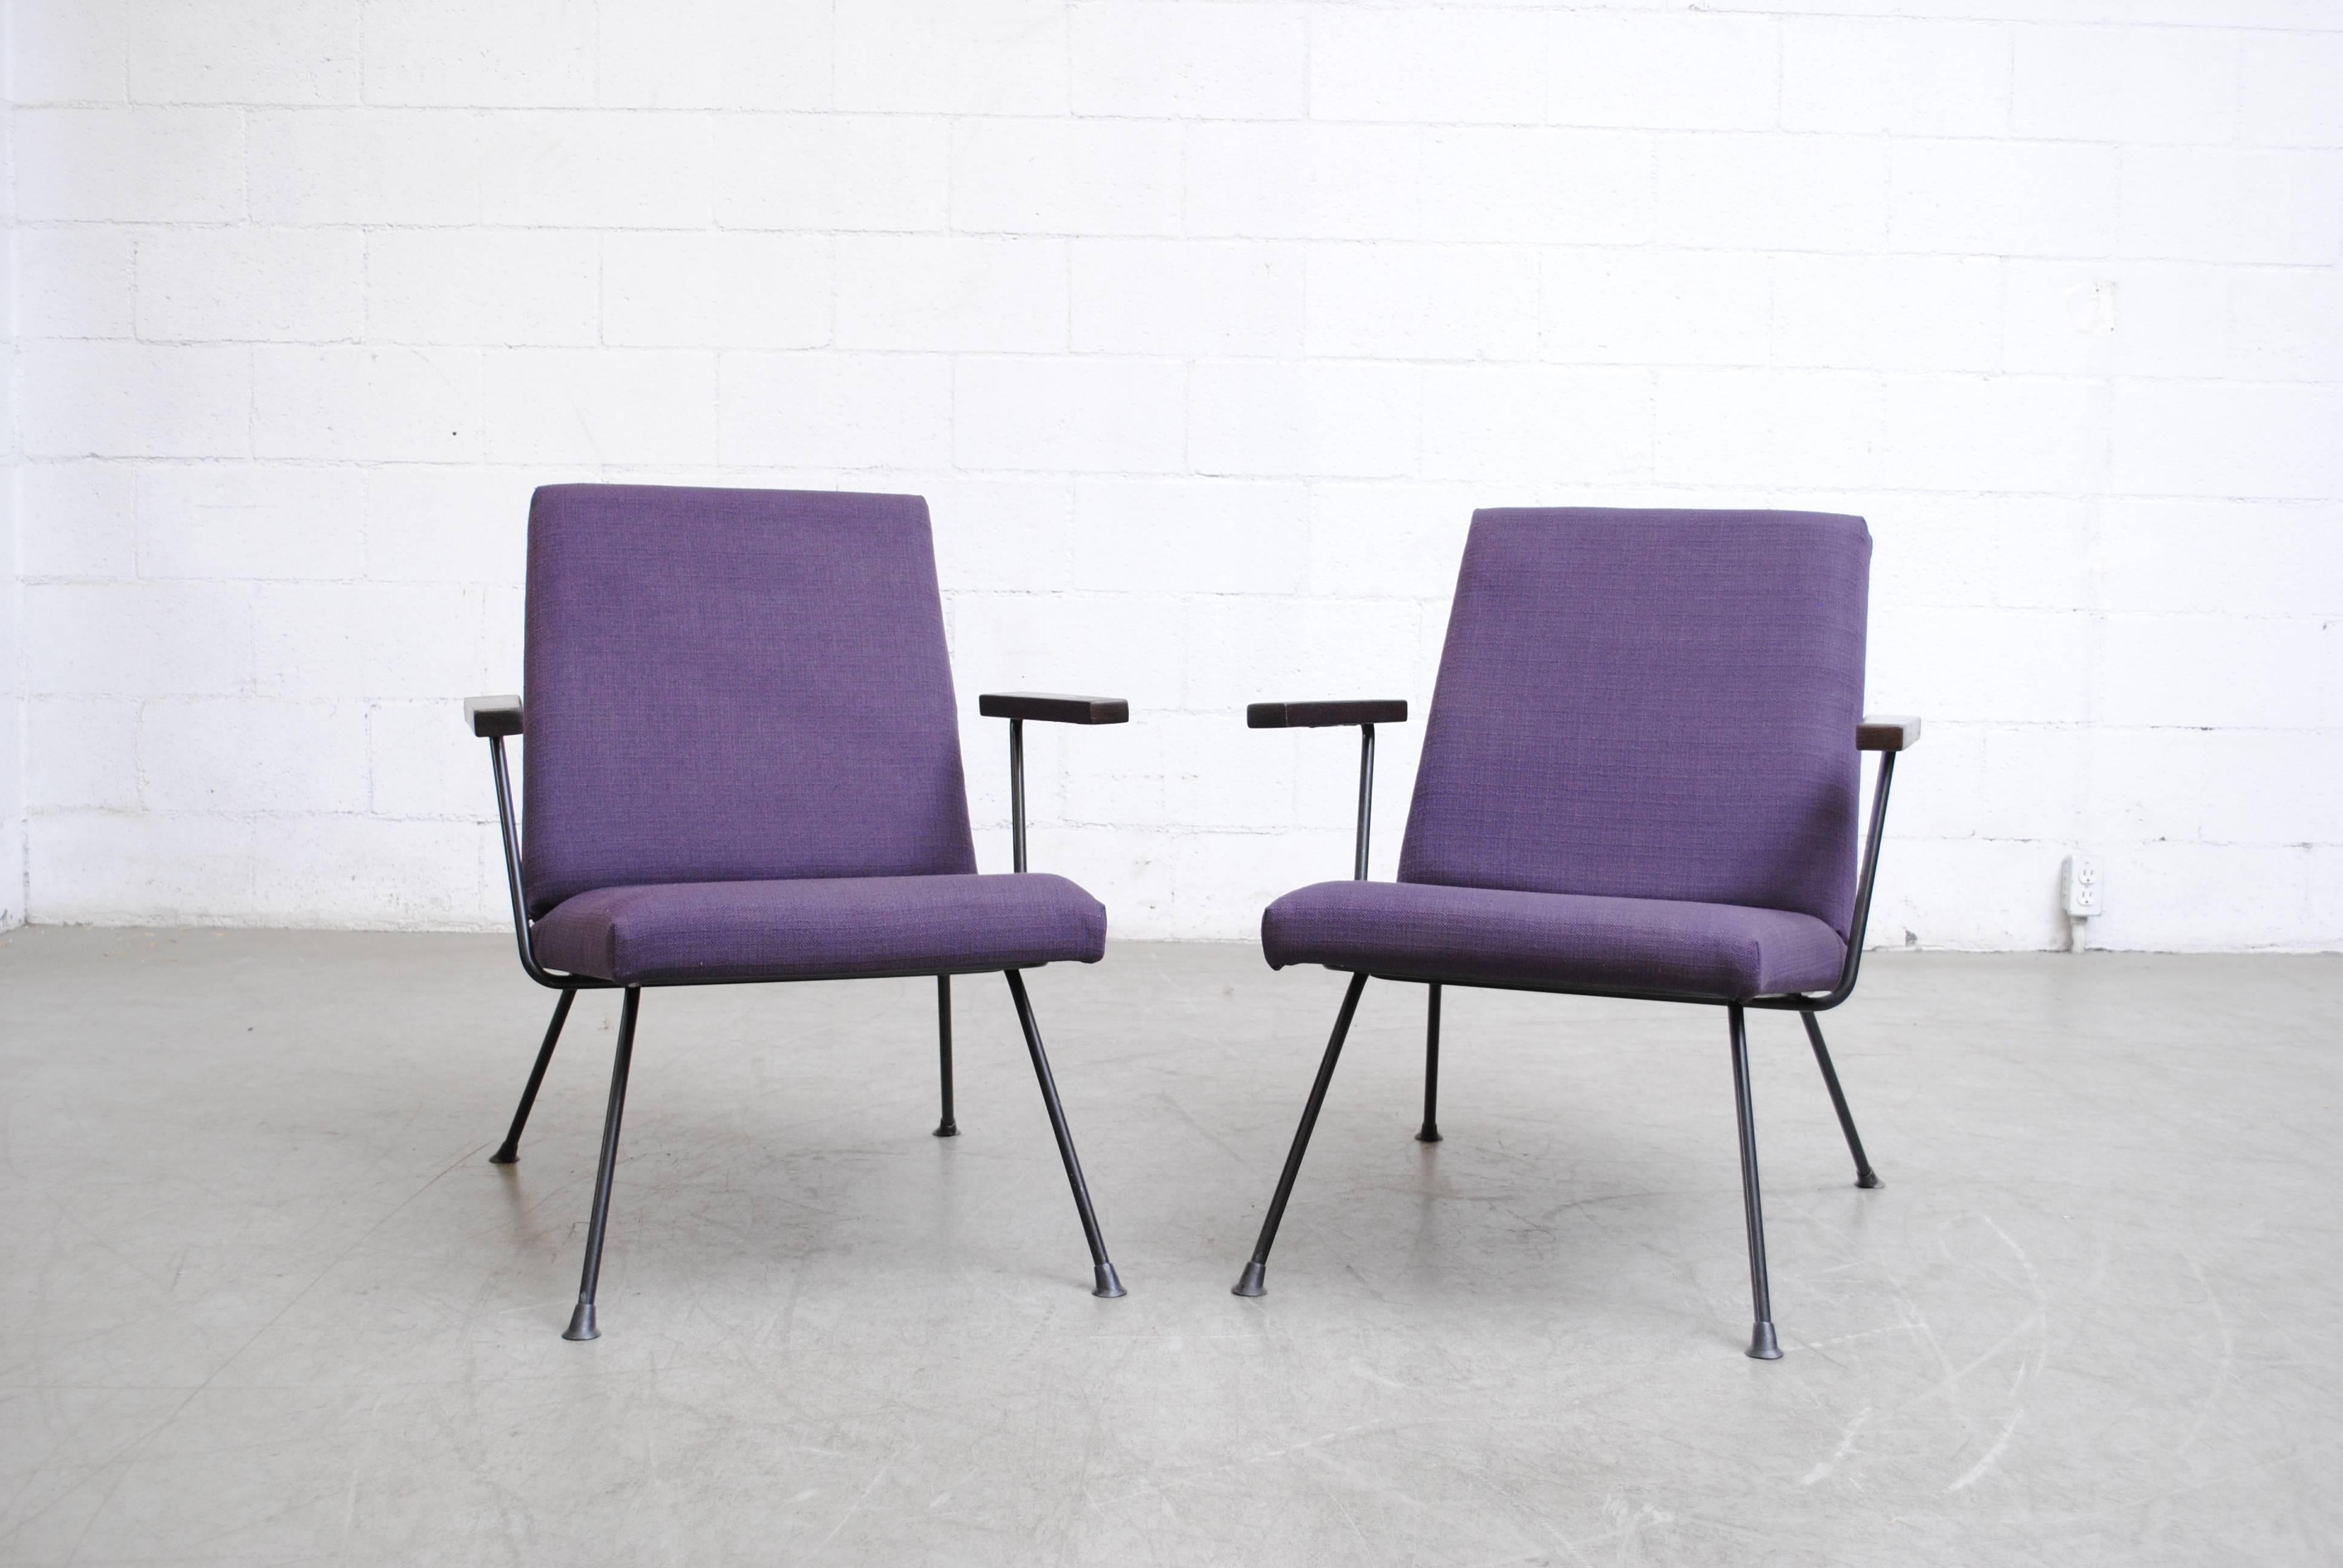 Pair of newly upholstered, A.R Cordemeyer designed, plum Gispen 1409 chairs with wenge armrests and black enameled metal frame. Frames in good original condition. Fabric color is more vibrant in the photo than in reality. Manufactured in 1959. Set